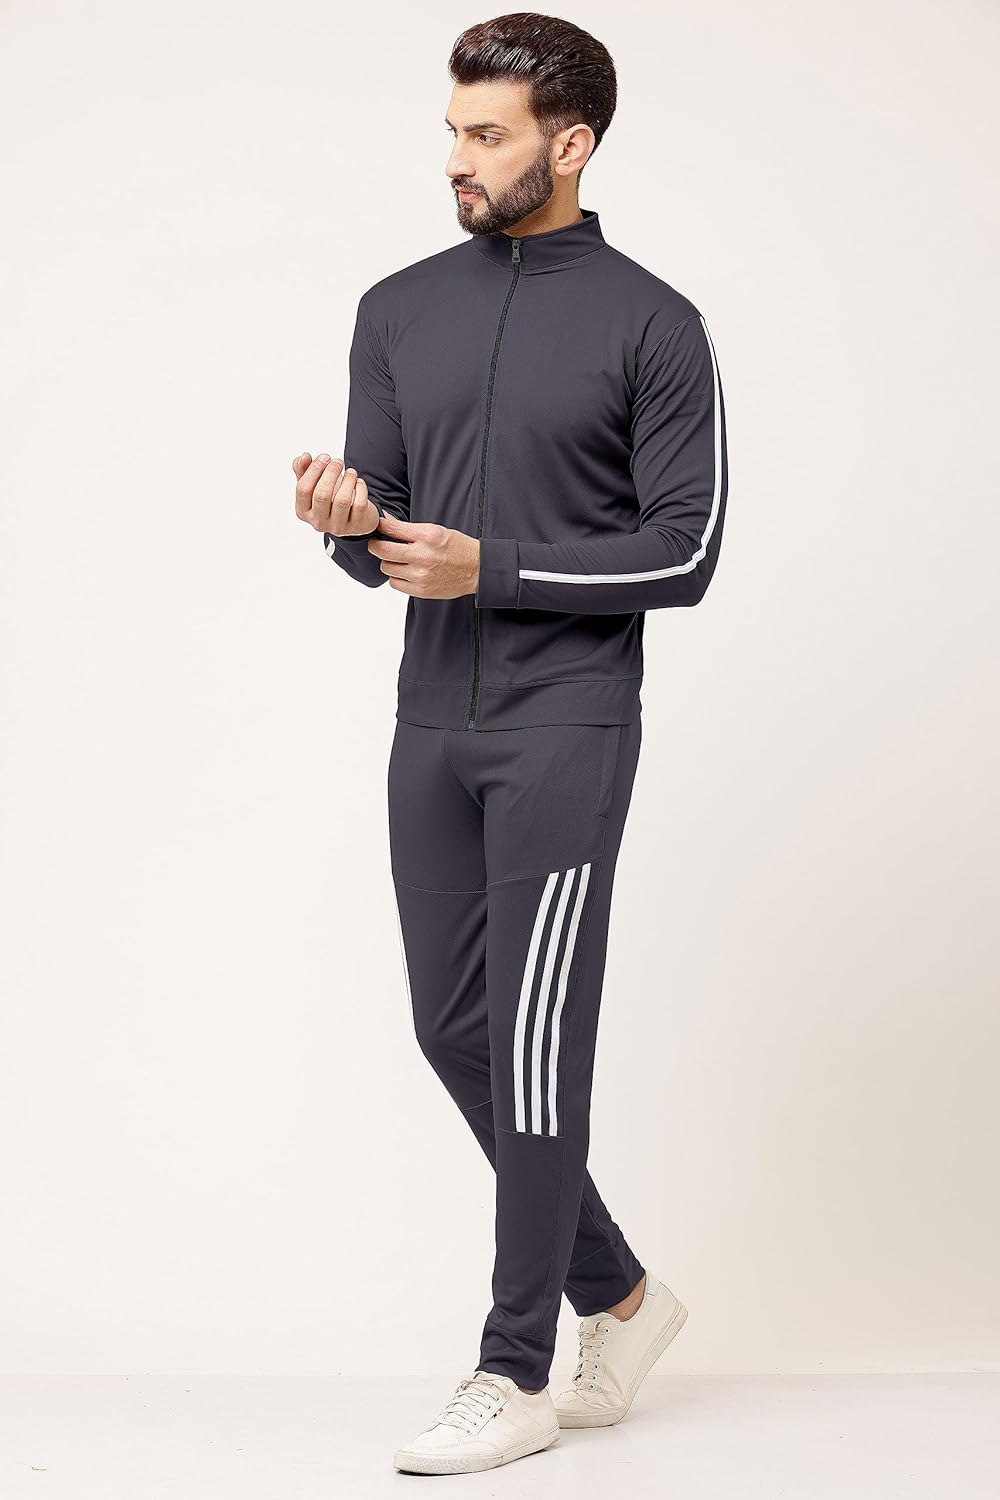 Dry Fit Addi Track Suit Set for Men | Slim Fit Perfect for Jogging and Lounging